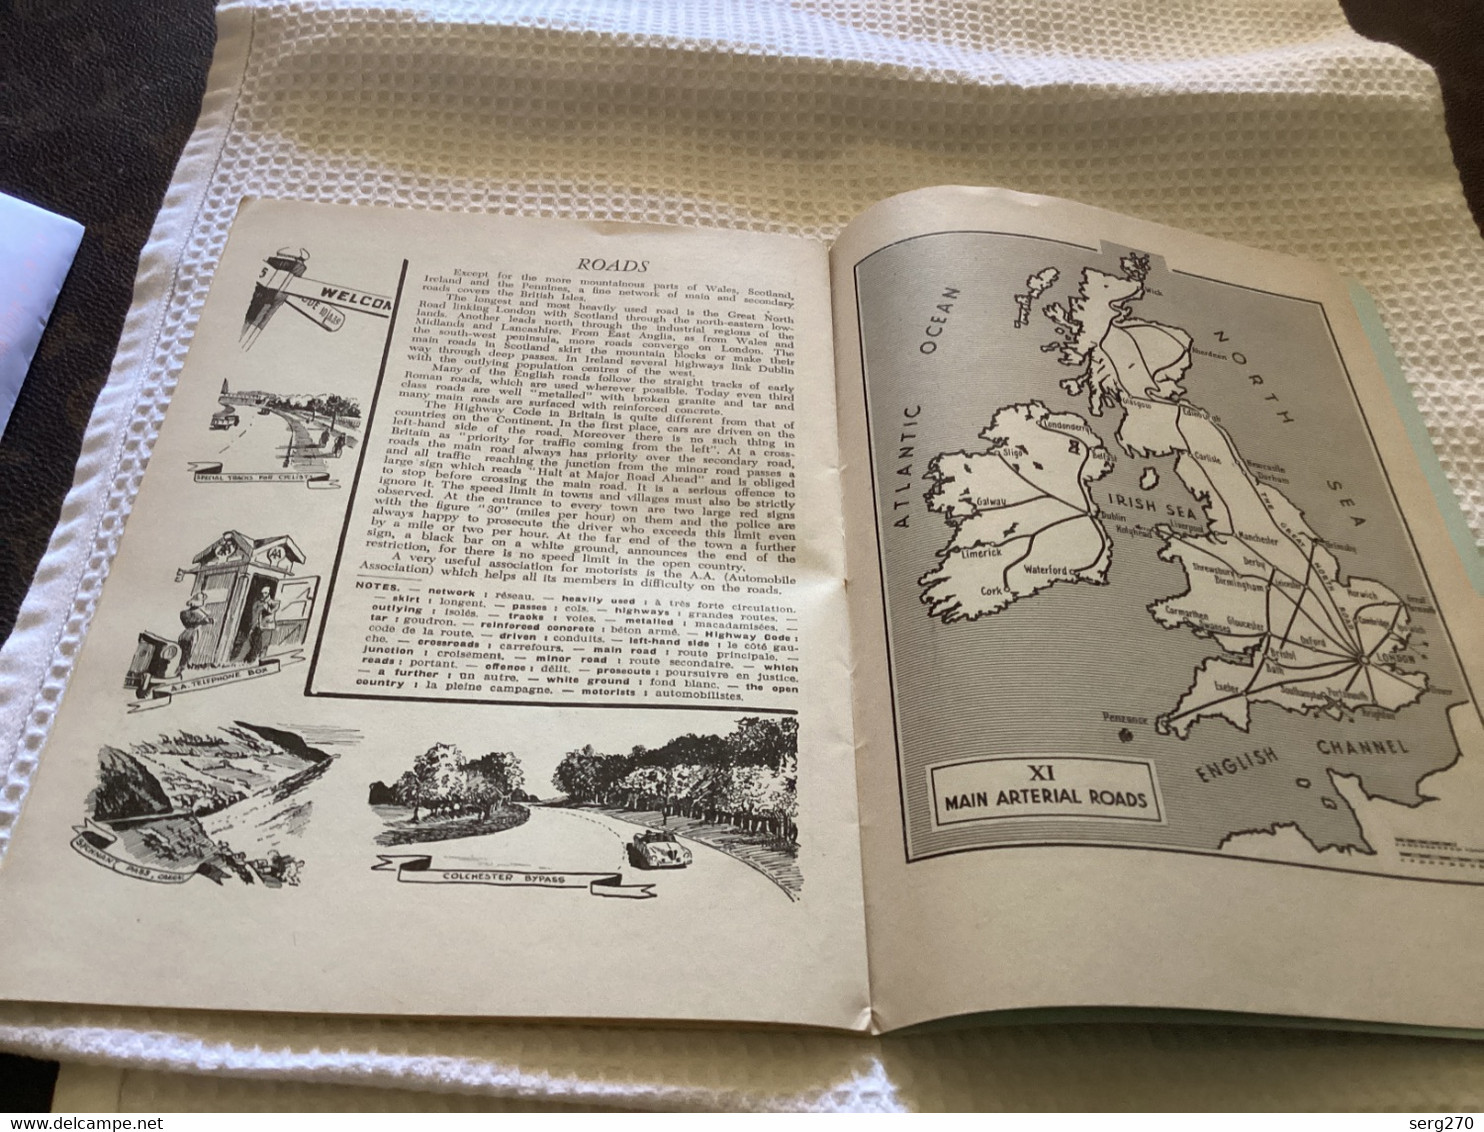 THE NEW BRITON - SPECIAL NUMBER - APRIL 1957 / GEOGRAPHY OF BRITAIN. - COLLECTIF - 1957